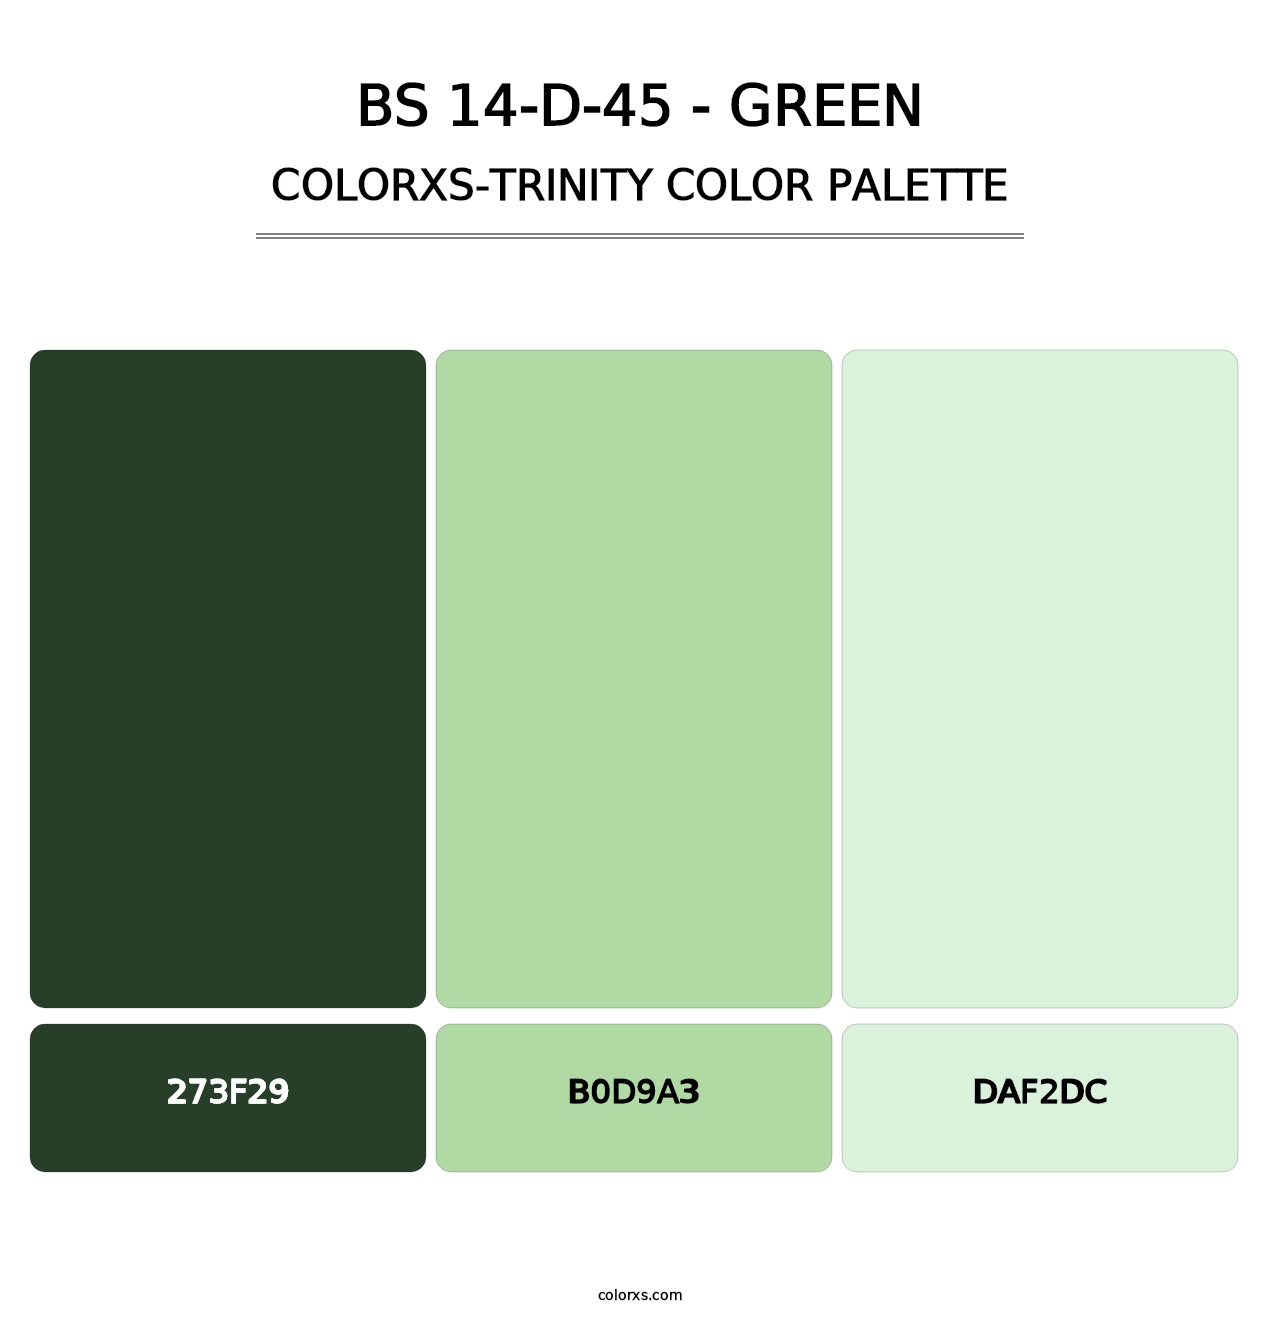 BS 14-D-45 - Green - Colorxs Trinity Palette